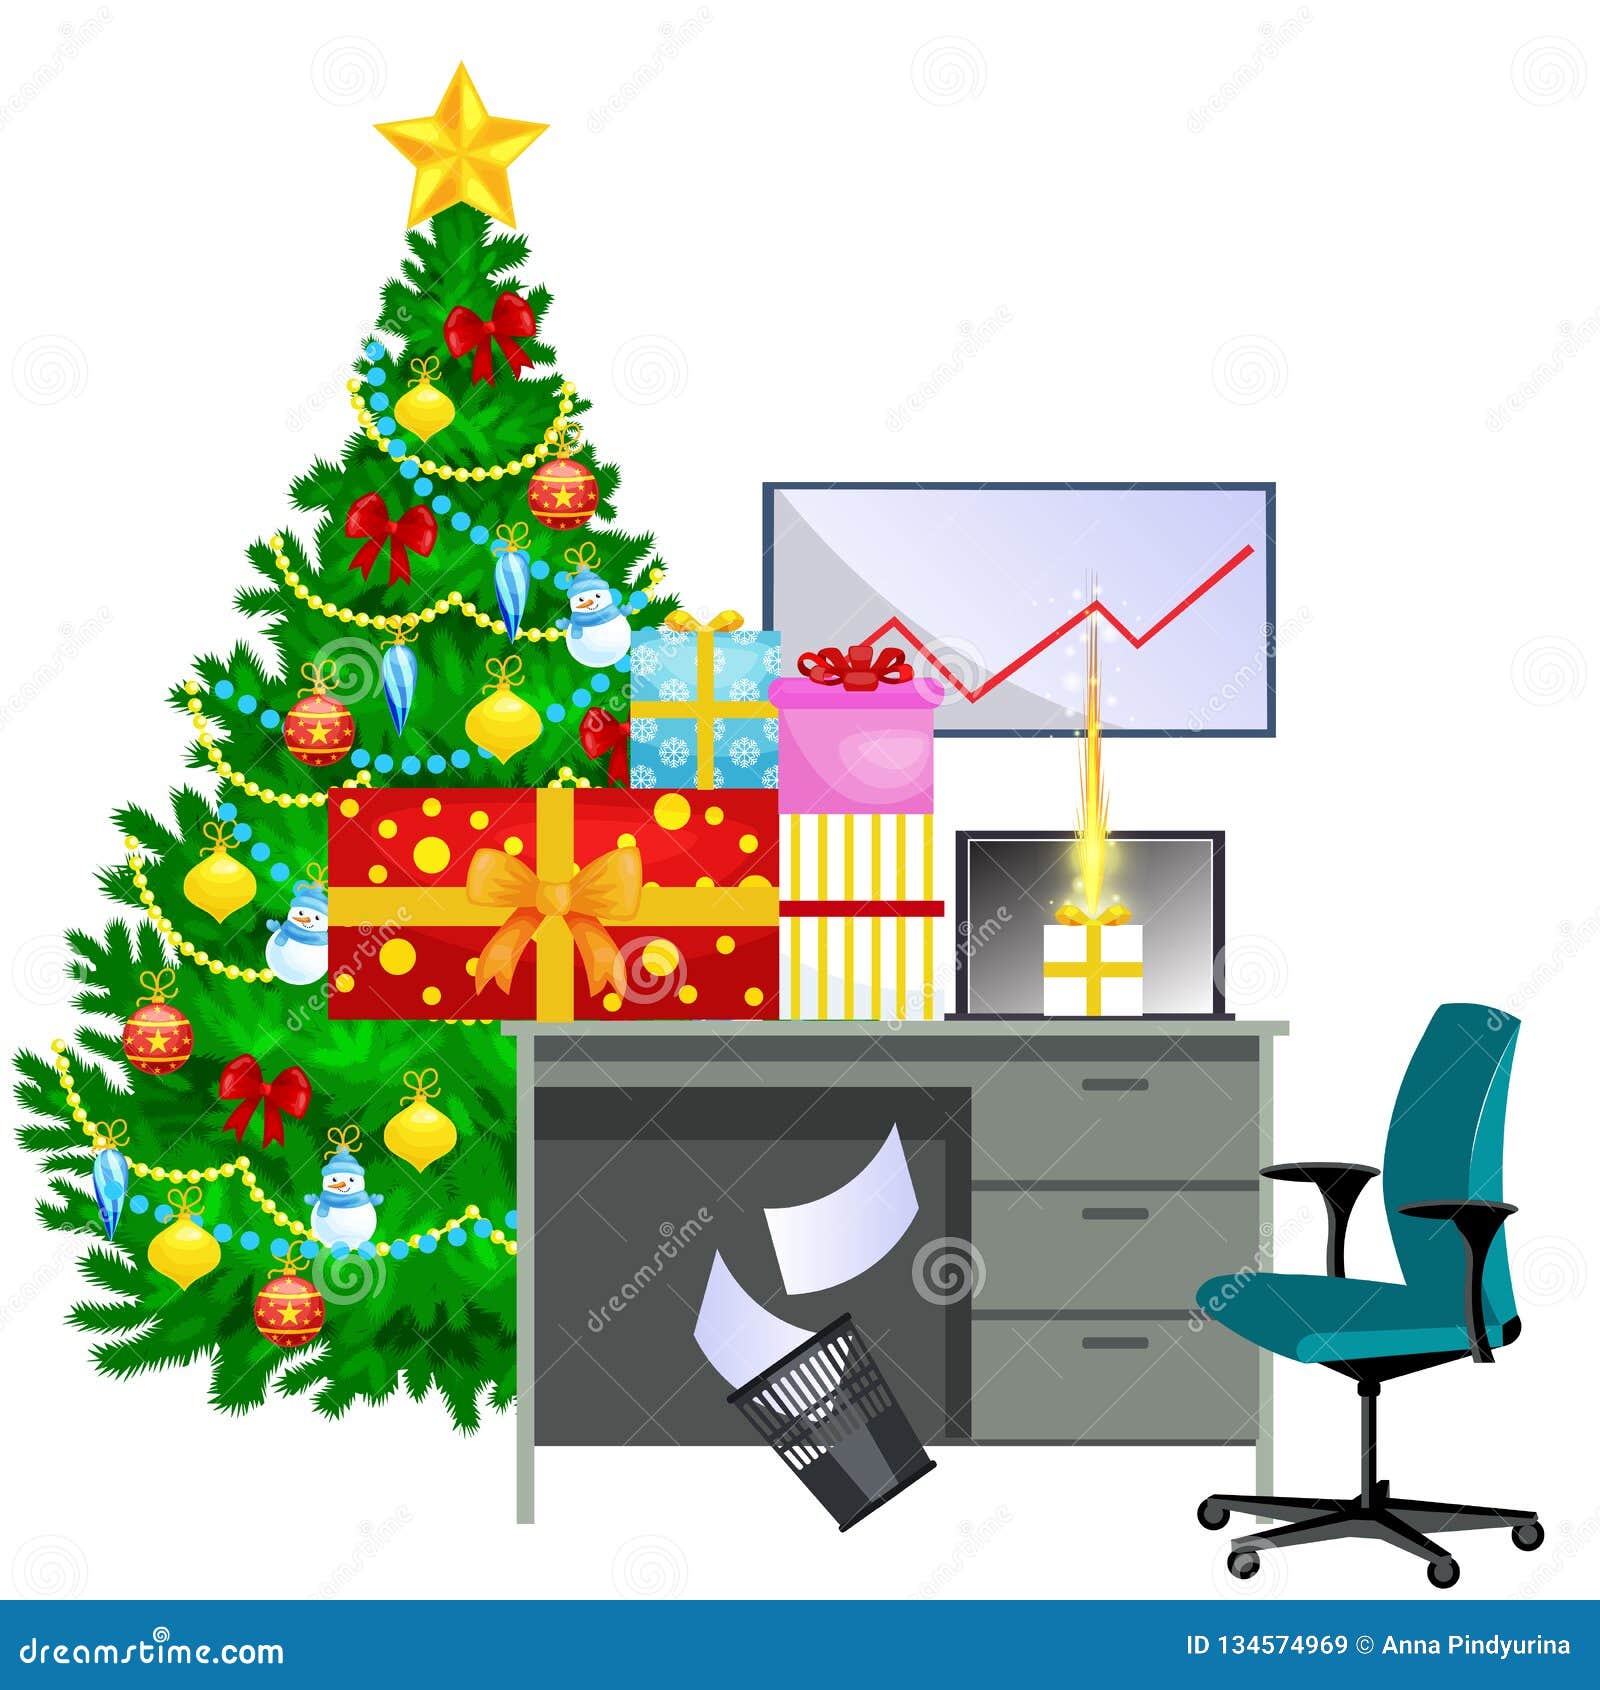 Cartoon Image Of Office Desk And Christmas Tree Stock Vector